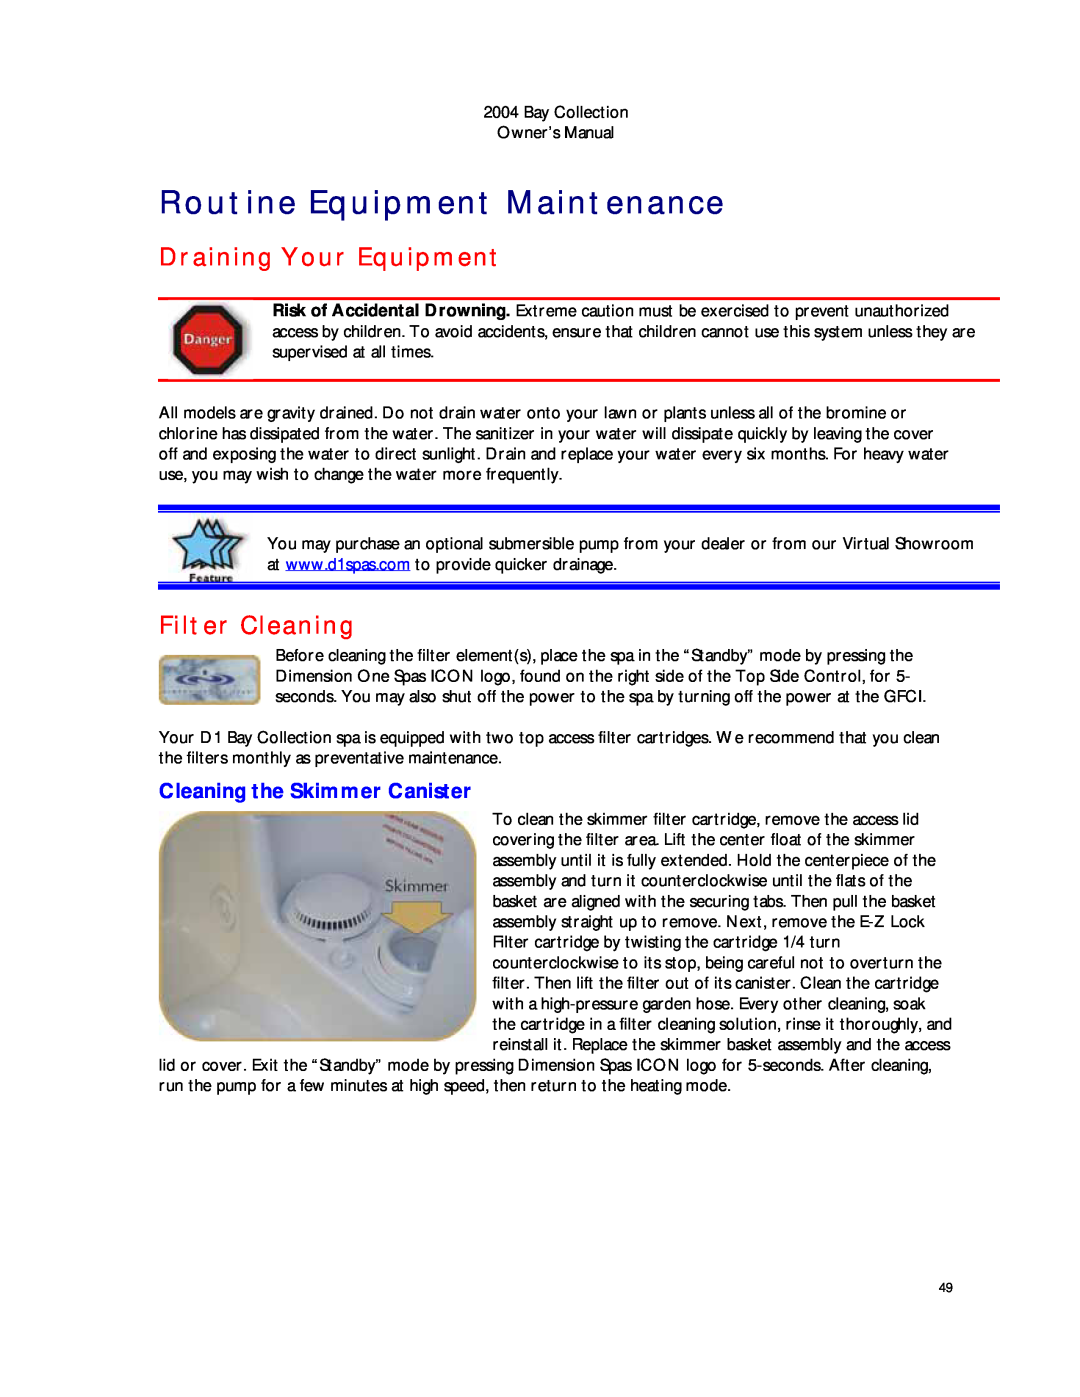 Dimension One Spas Bay Collection manual Routine Equipment Maintenance, Draining Your Equipment, Filter Cleaning 